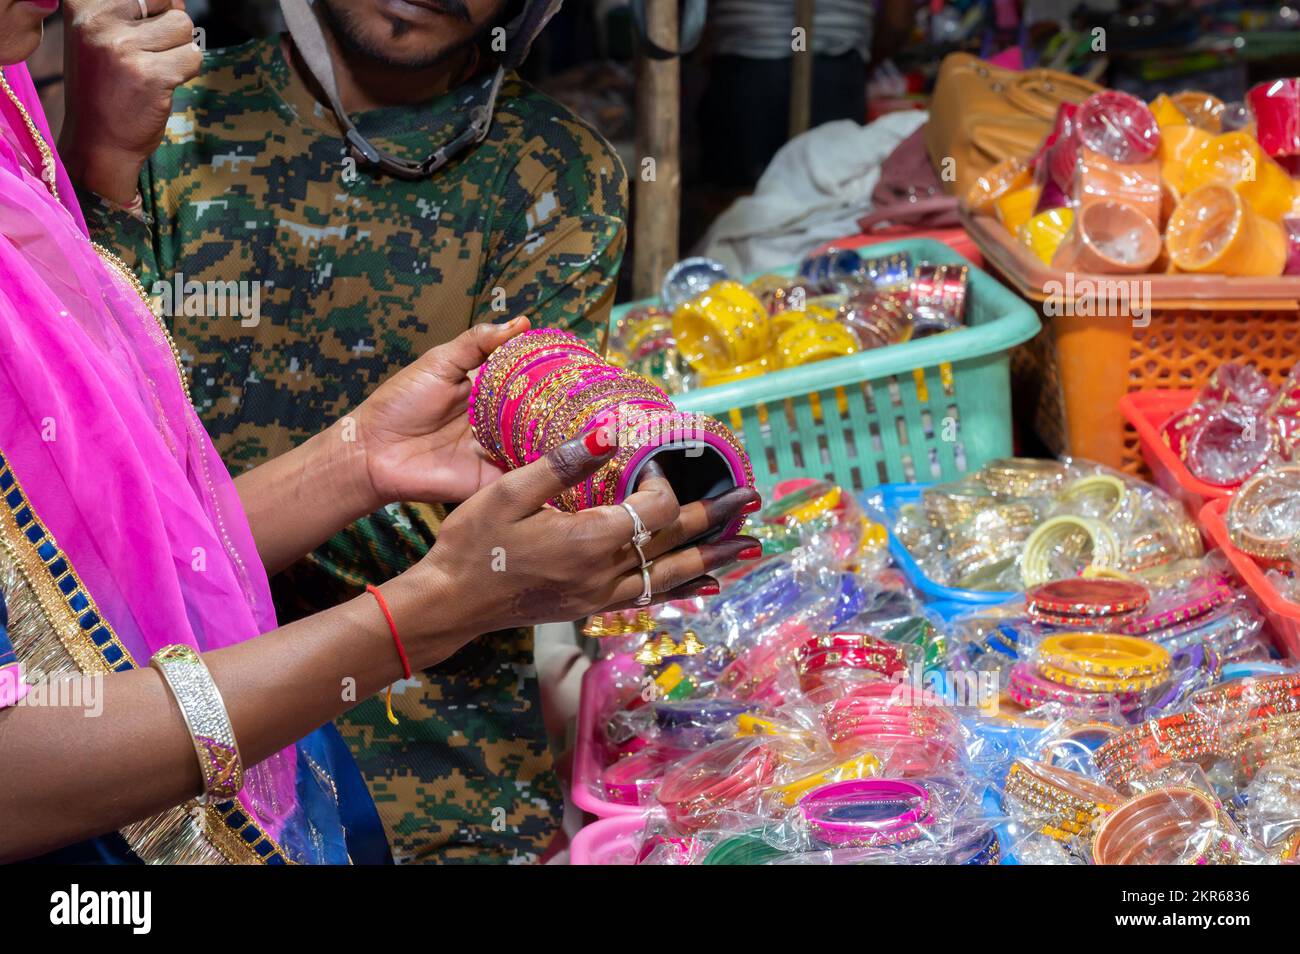 Rajasthani woman trying out colorful bangles. Bangles being sold at famous Sardar Market and Ghanta ghar Clock tower in Jodhpur, Rajasthan, India. Stock Photo